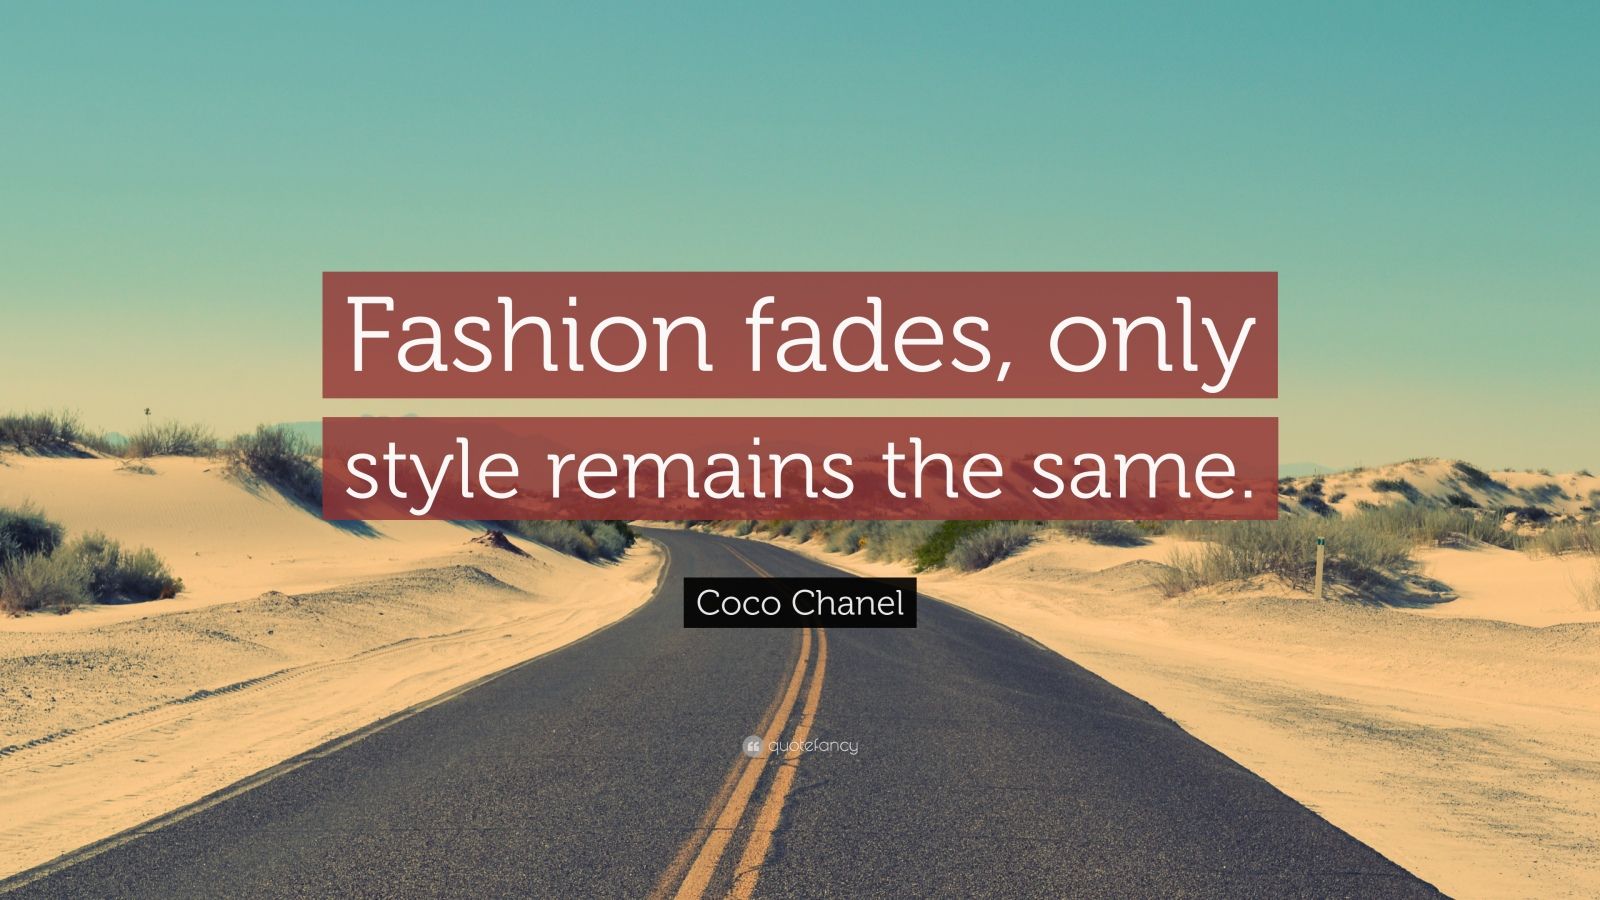 Coco Chanel Quote: “Fashion fades, only style remains the same.”